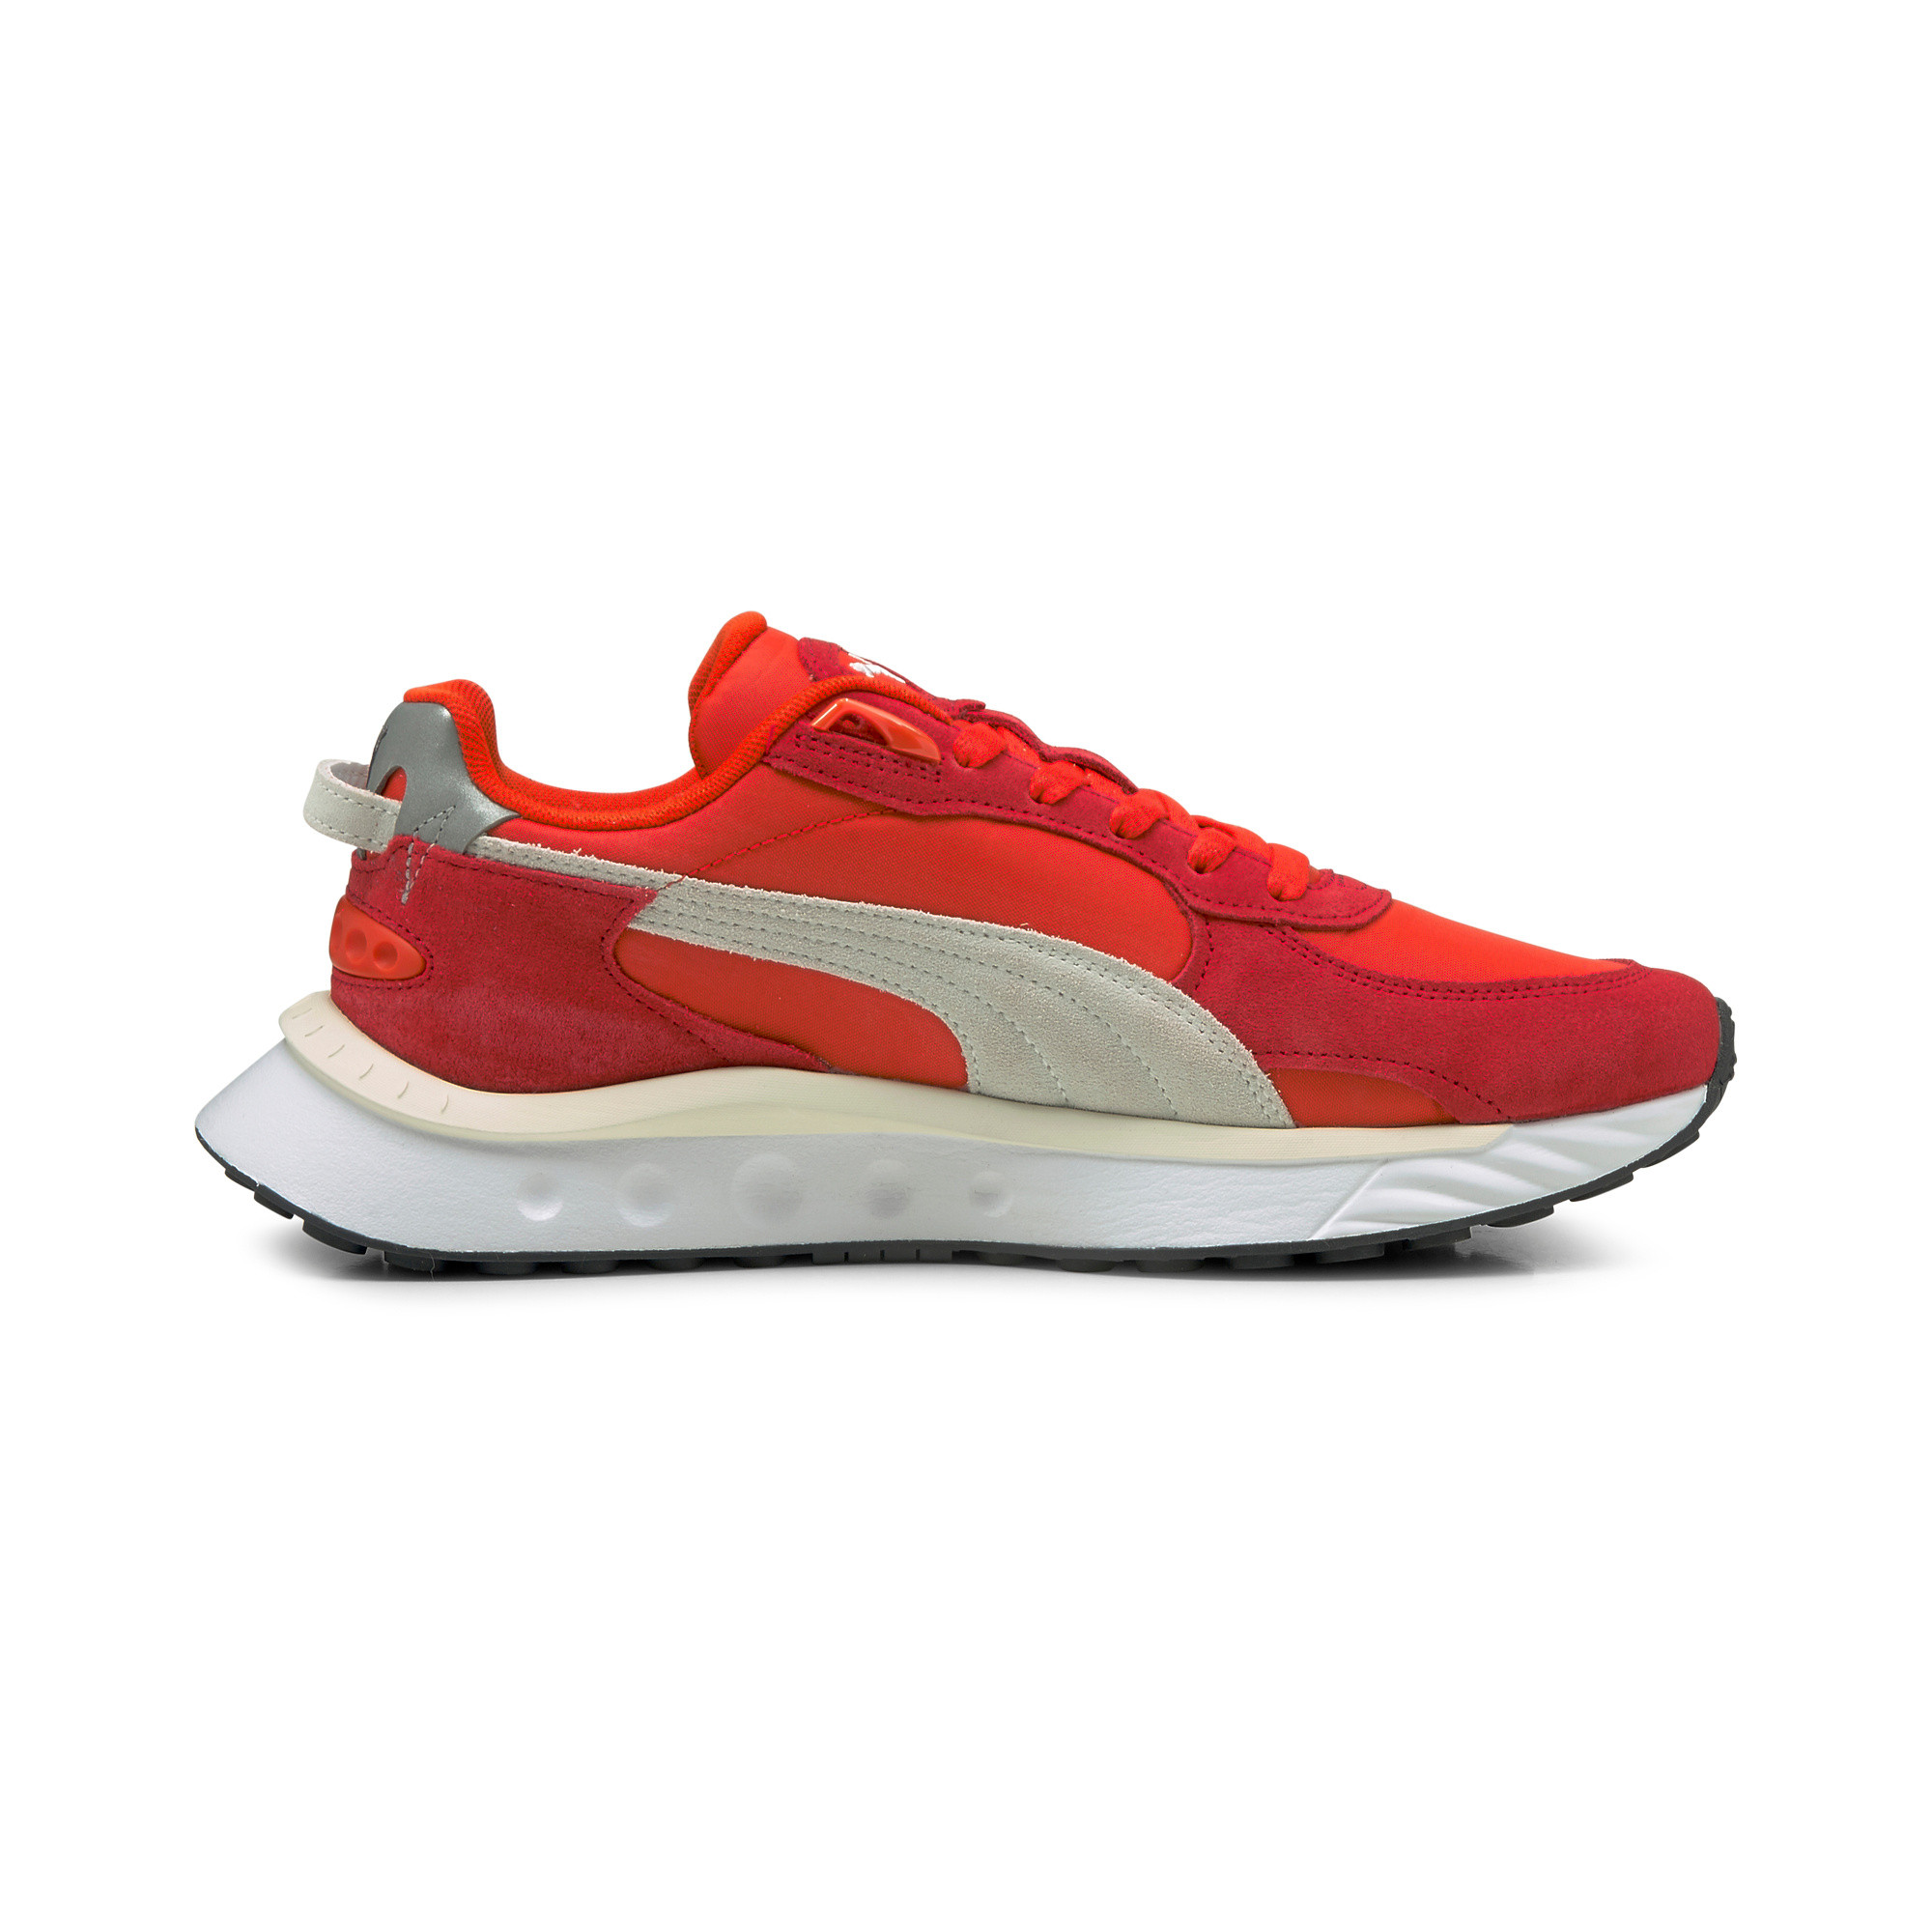 PUMA sneakers, Red, large image number 1